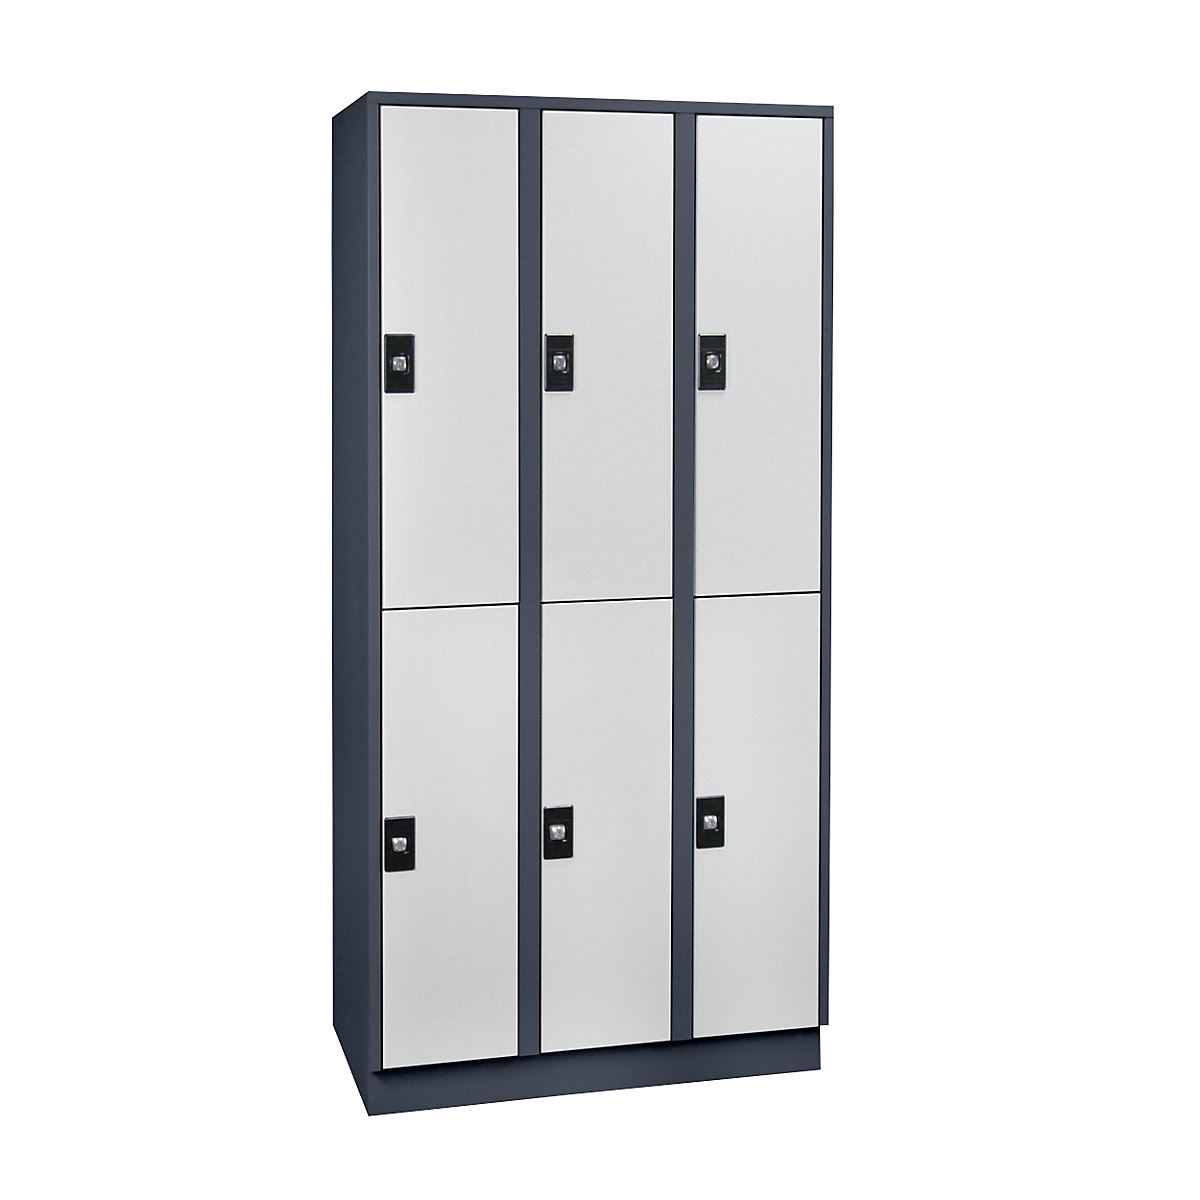 Cloakroom locker – Wolf, 6 compartments, width 900 mm, charcoal / light grey-9